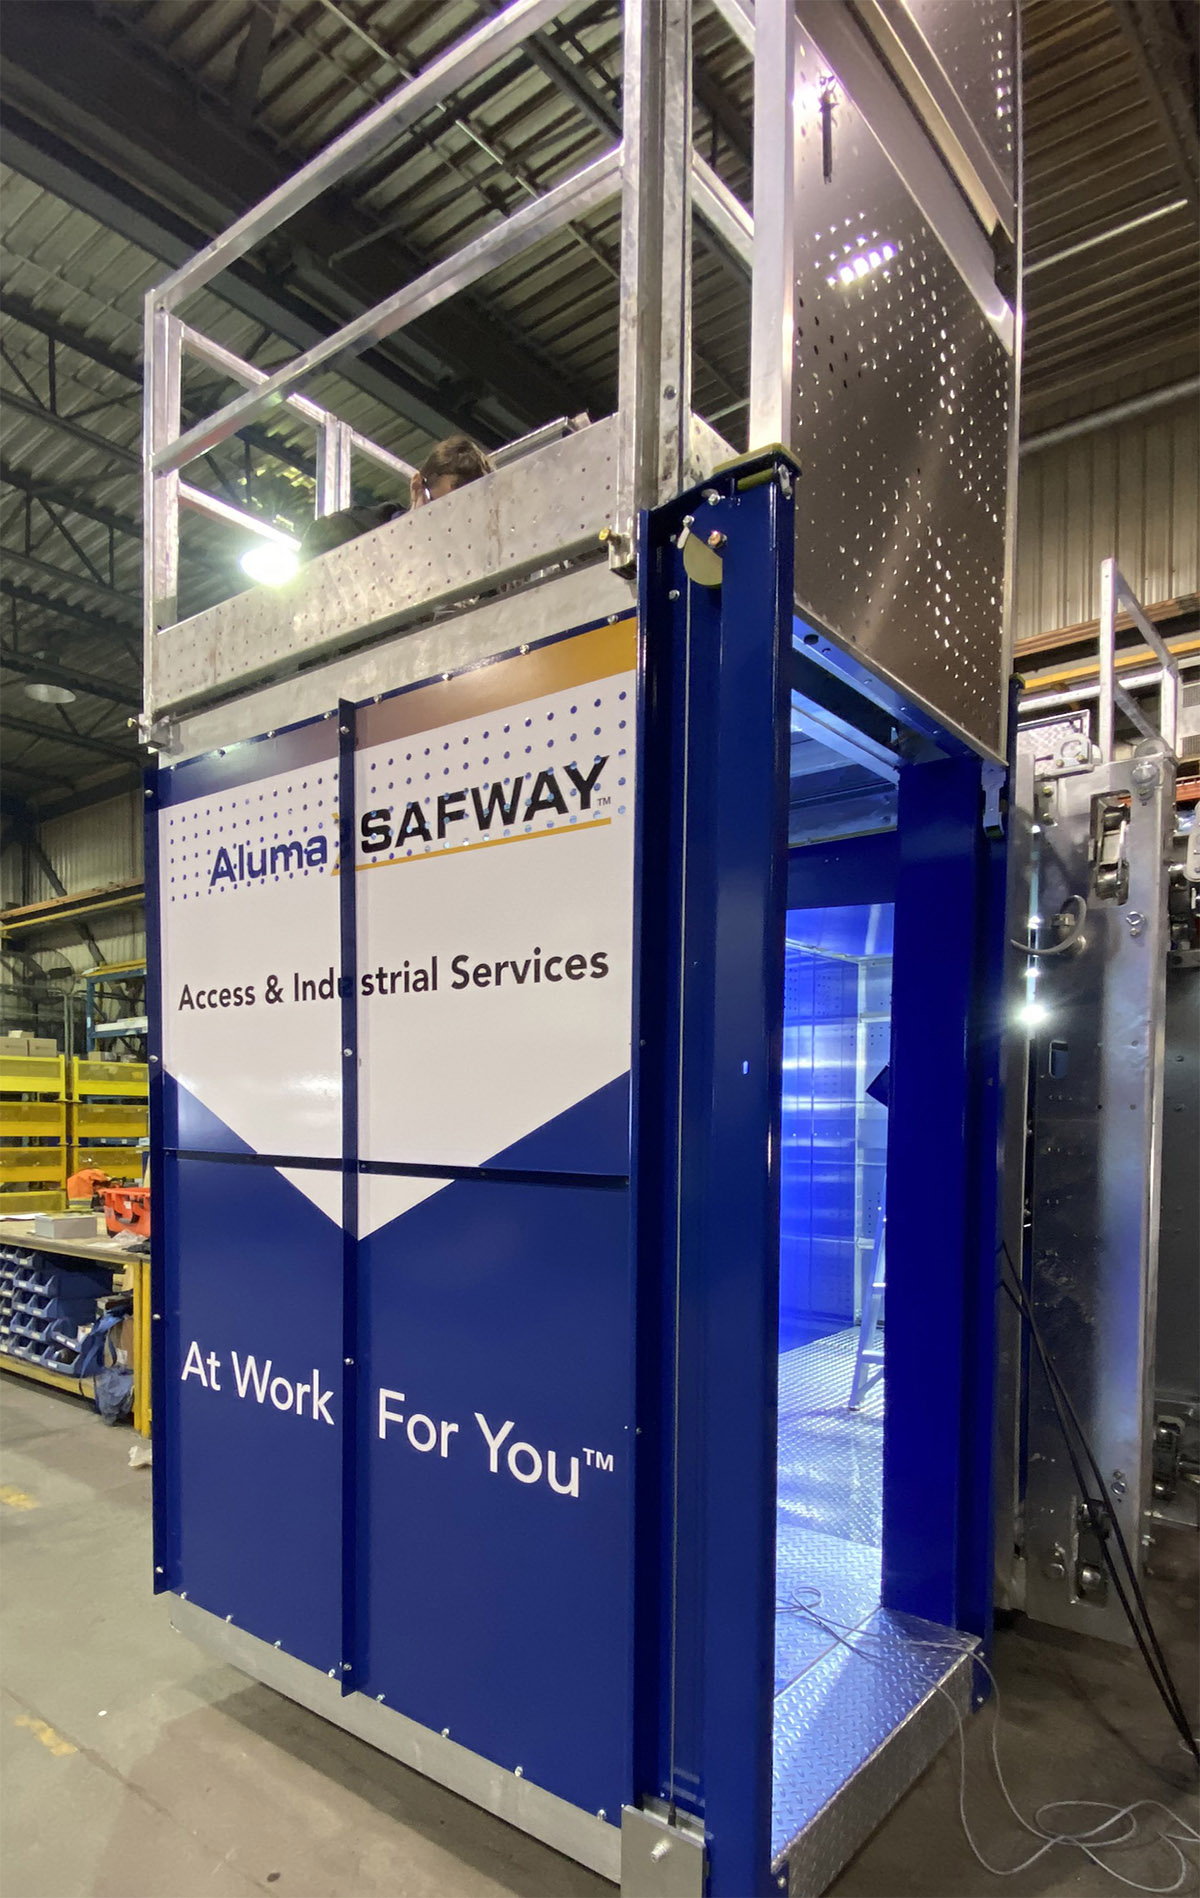 The elevator, which will be installed on the Canada bridge site in Windsor, Ontario, in the AlumaSafway fabrication facility.